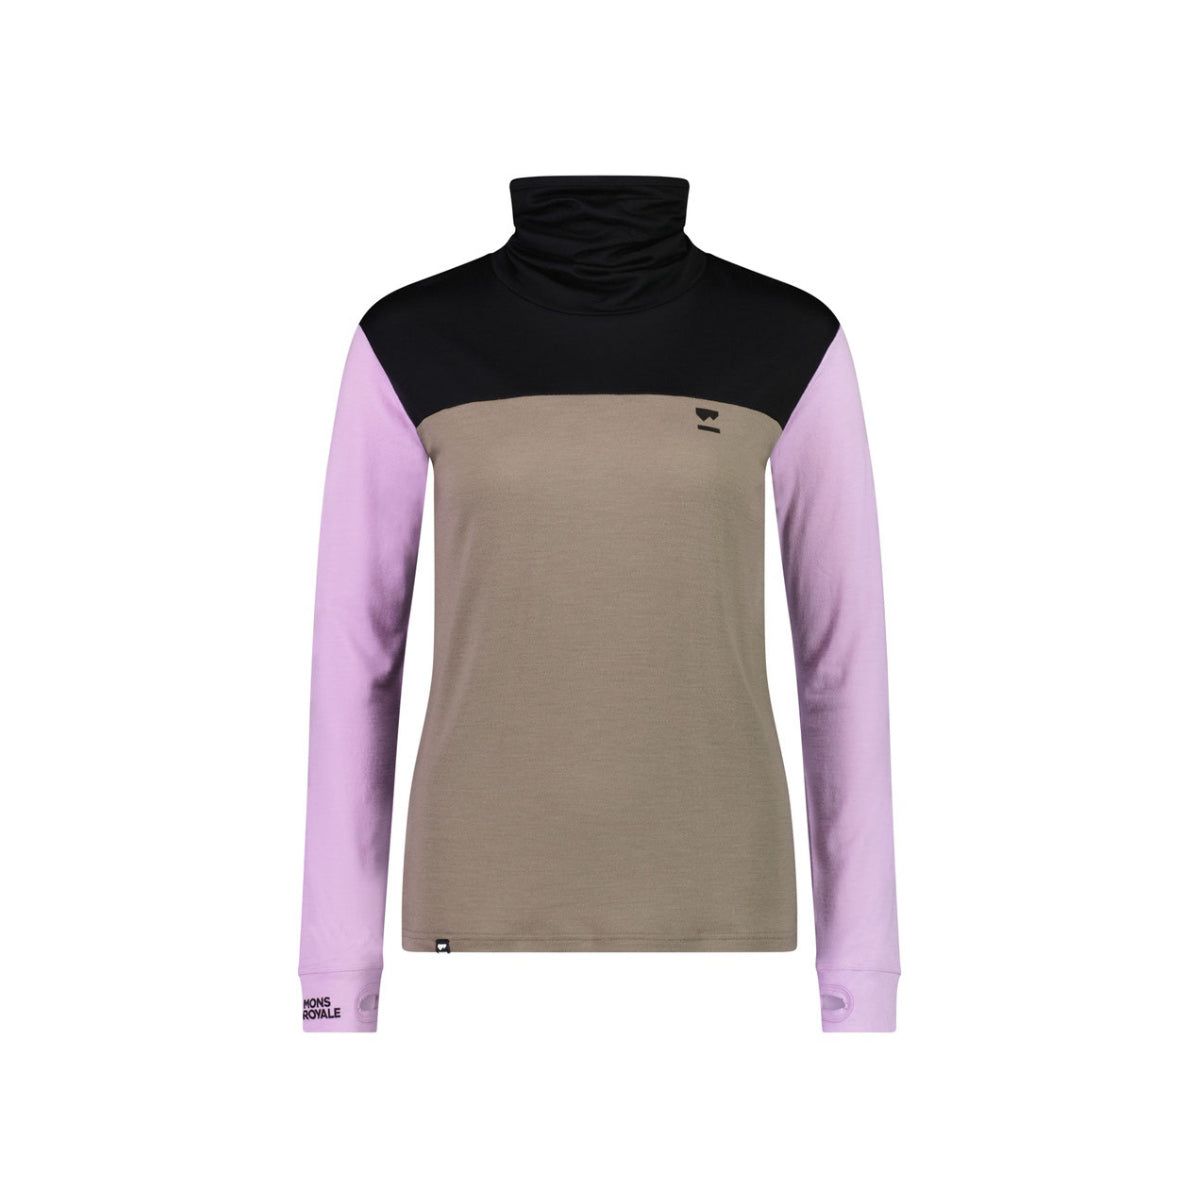 Mons Royale - Women's Yotei BF High Neck - Orchid Dawn